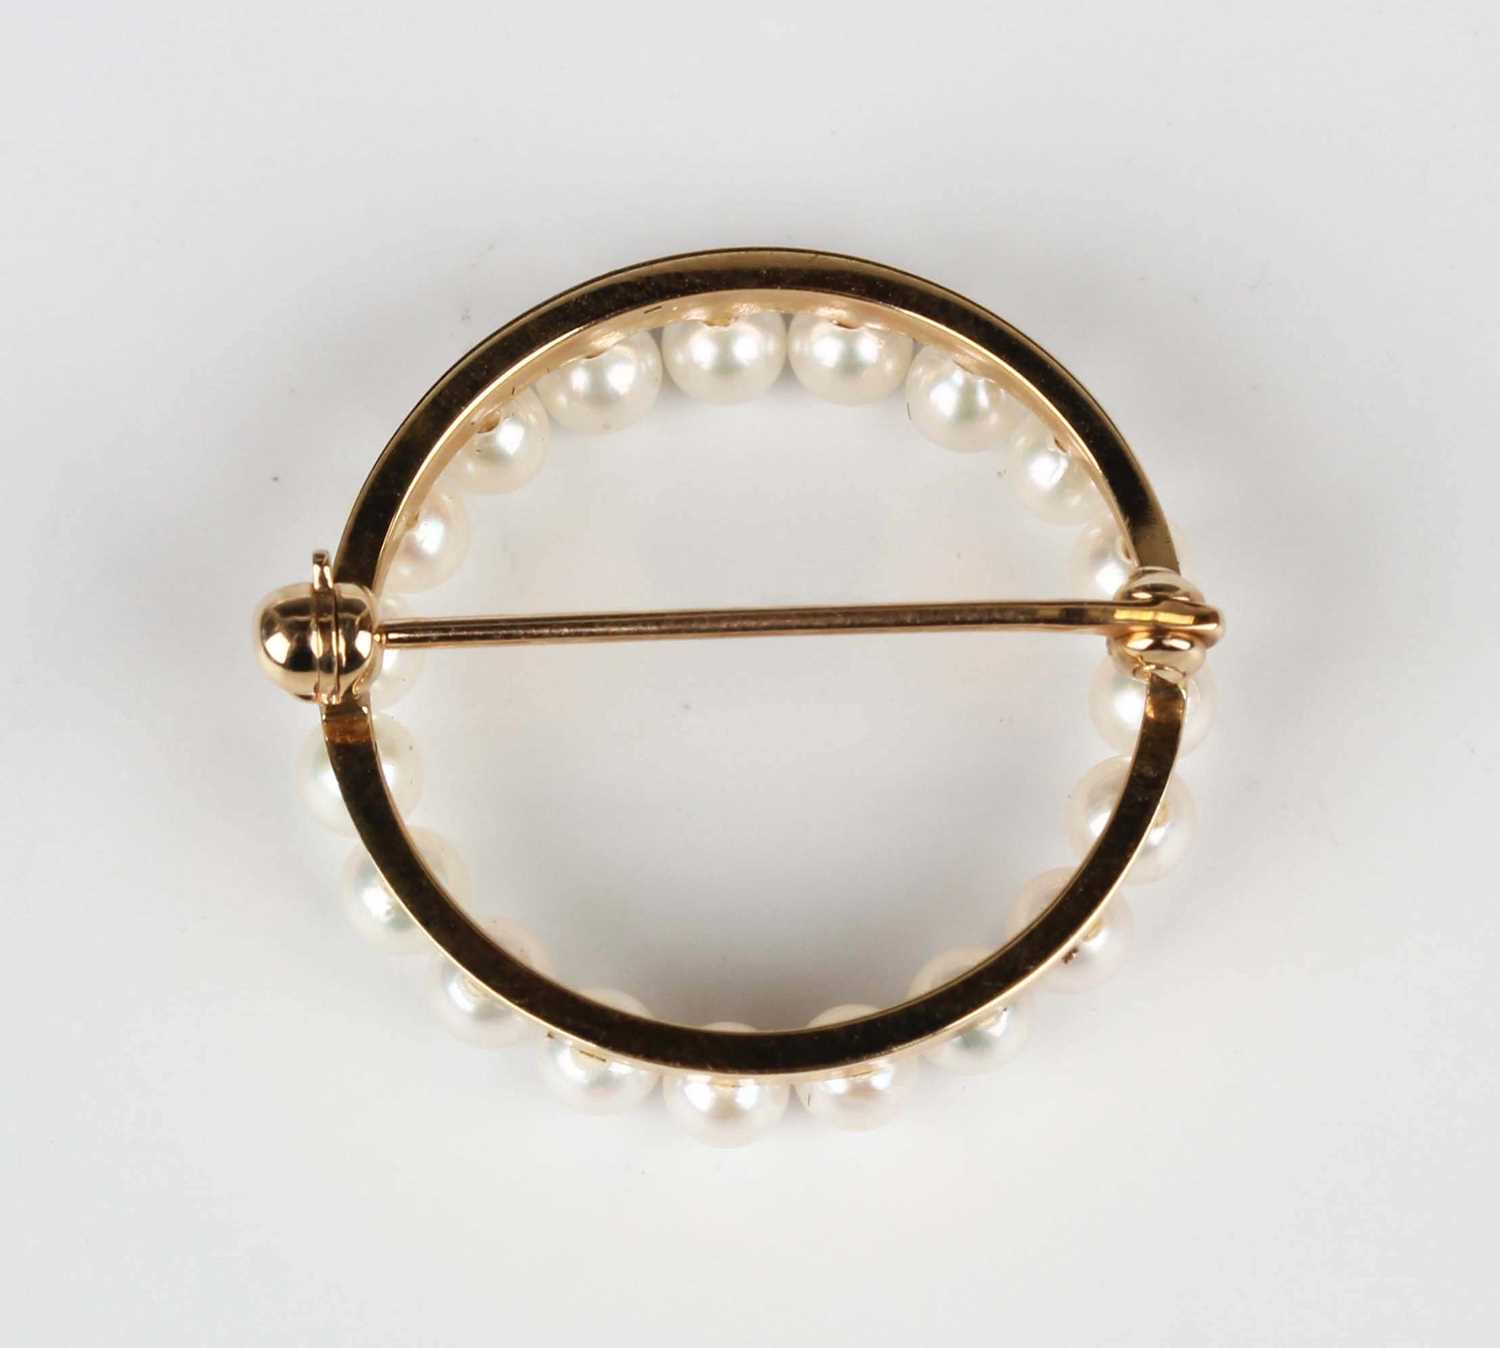 A gold and cultured pearl brooch in a circular design, detailed '14K', weight 2.5g, diameter 2.1cm. - Image 2 of 2